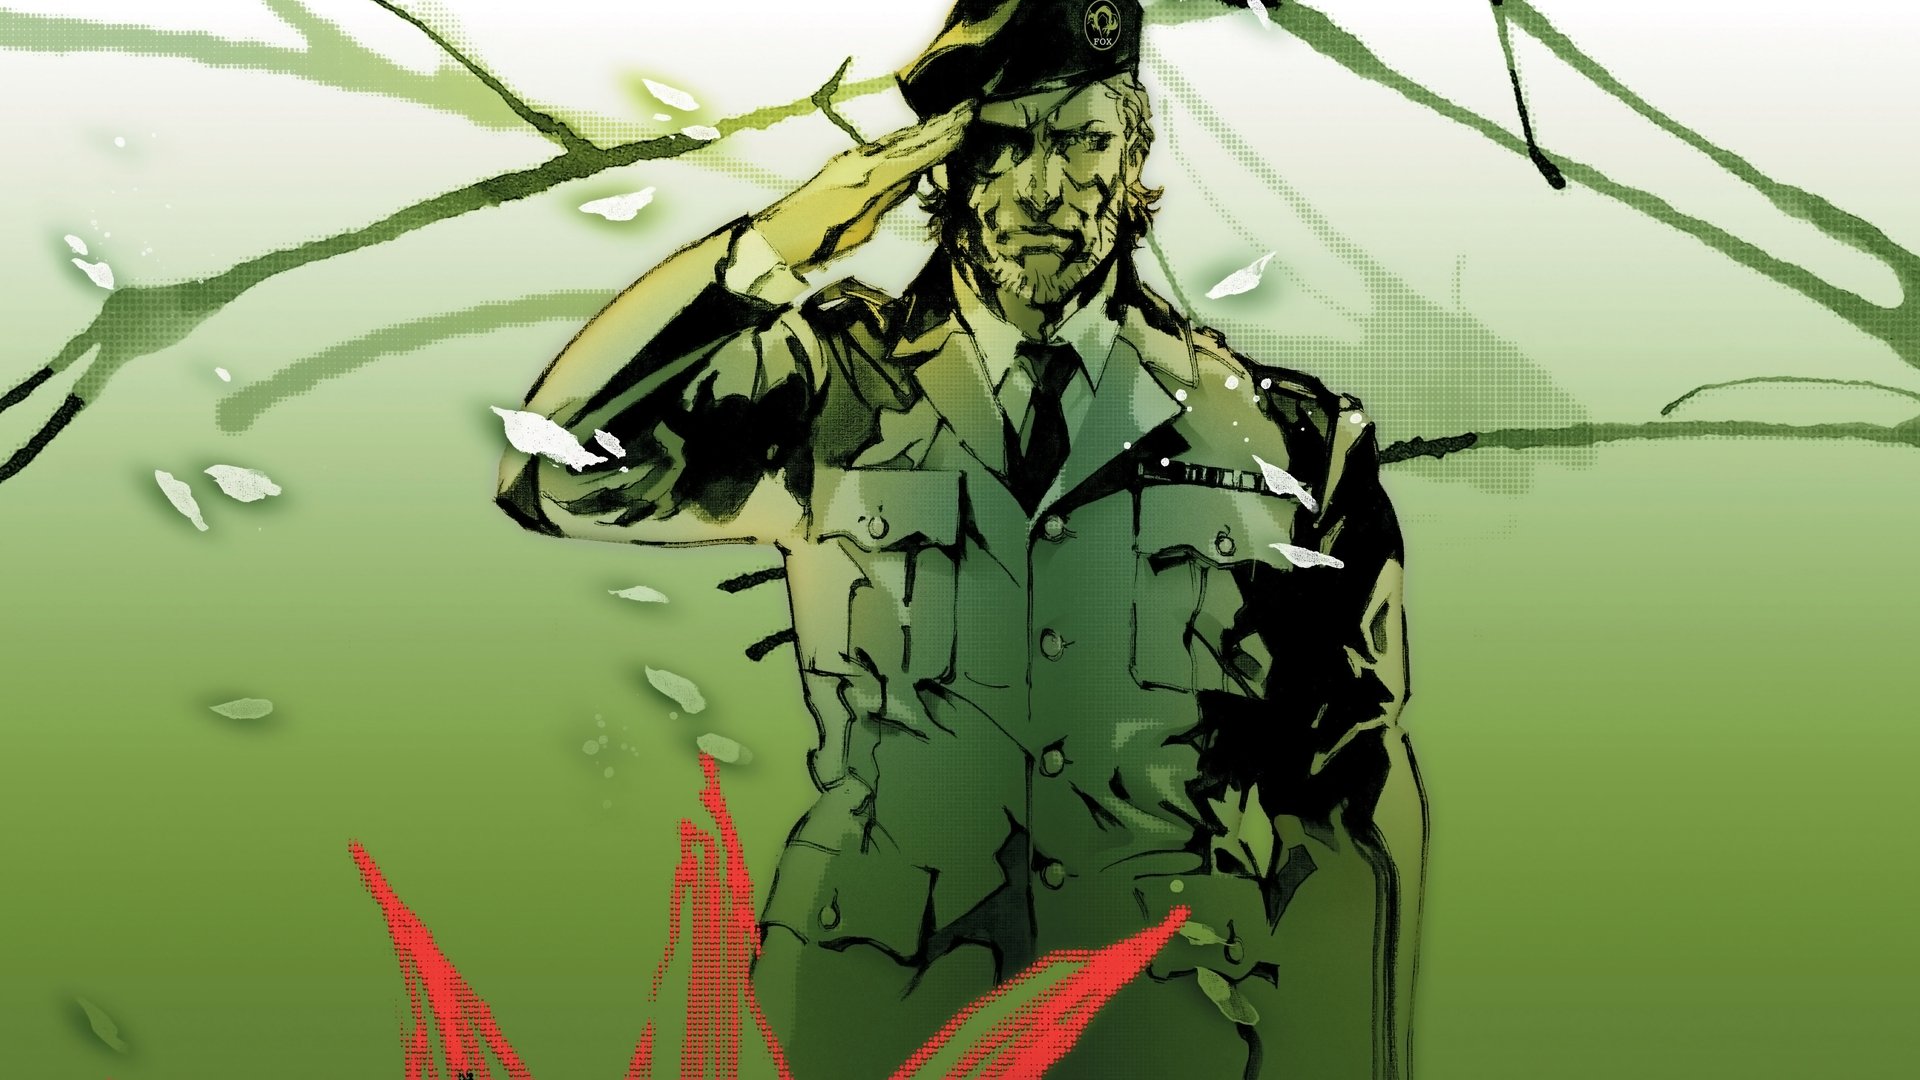 Free Metal Gear Solid 3: Snake Eater (MGS 3) high quality wallpaper ID:294563 for hd 1920x1080 desktop